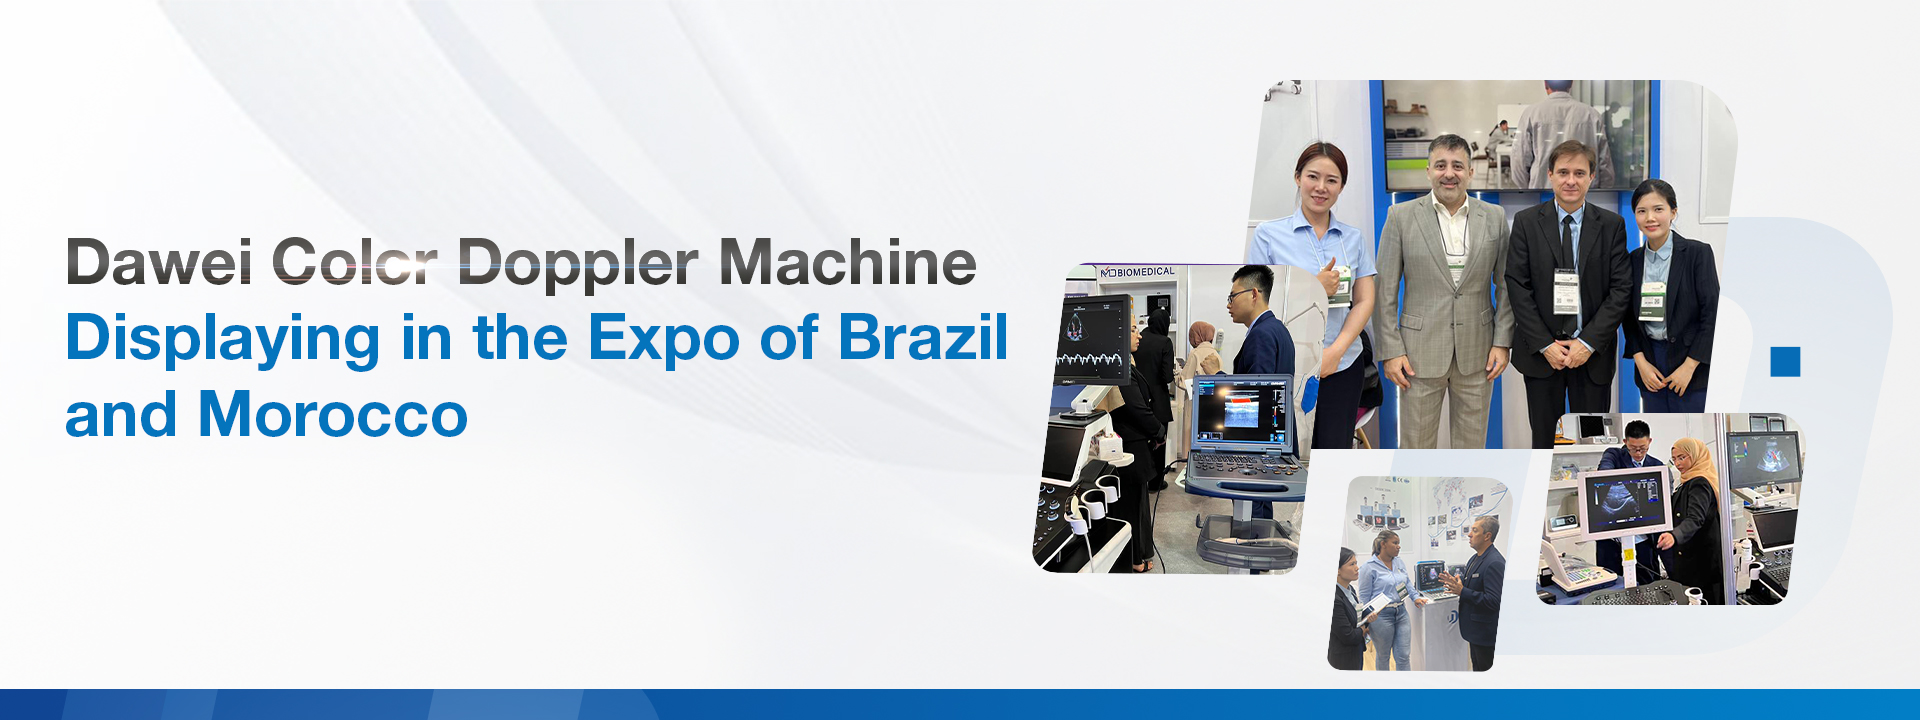 https://www.ultrasounddawei.com/news/dawei-color-doppler-machine-displaying-in-the-expo-of-brazil-and-morocco/